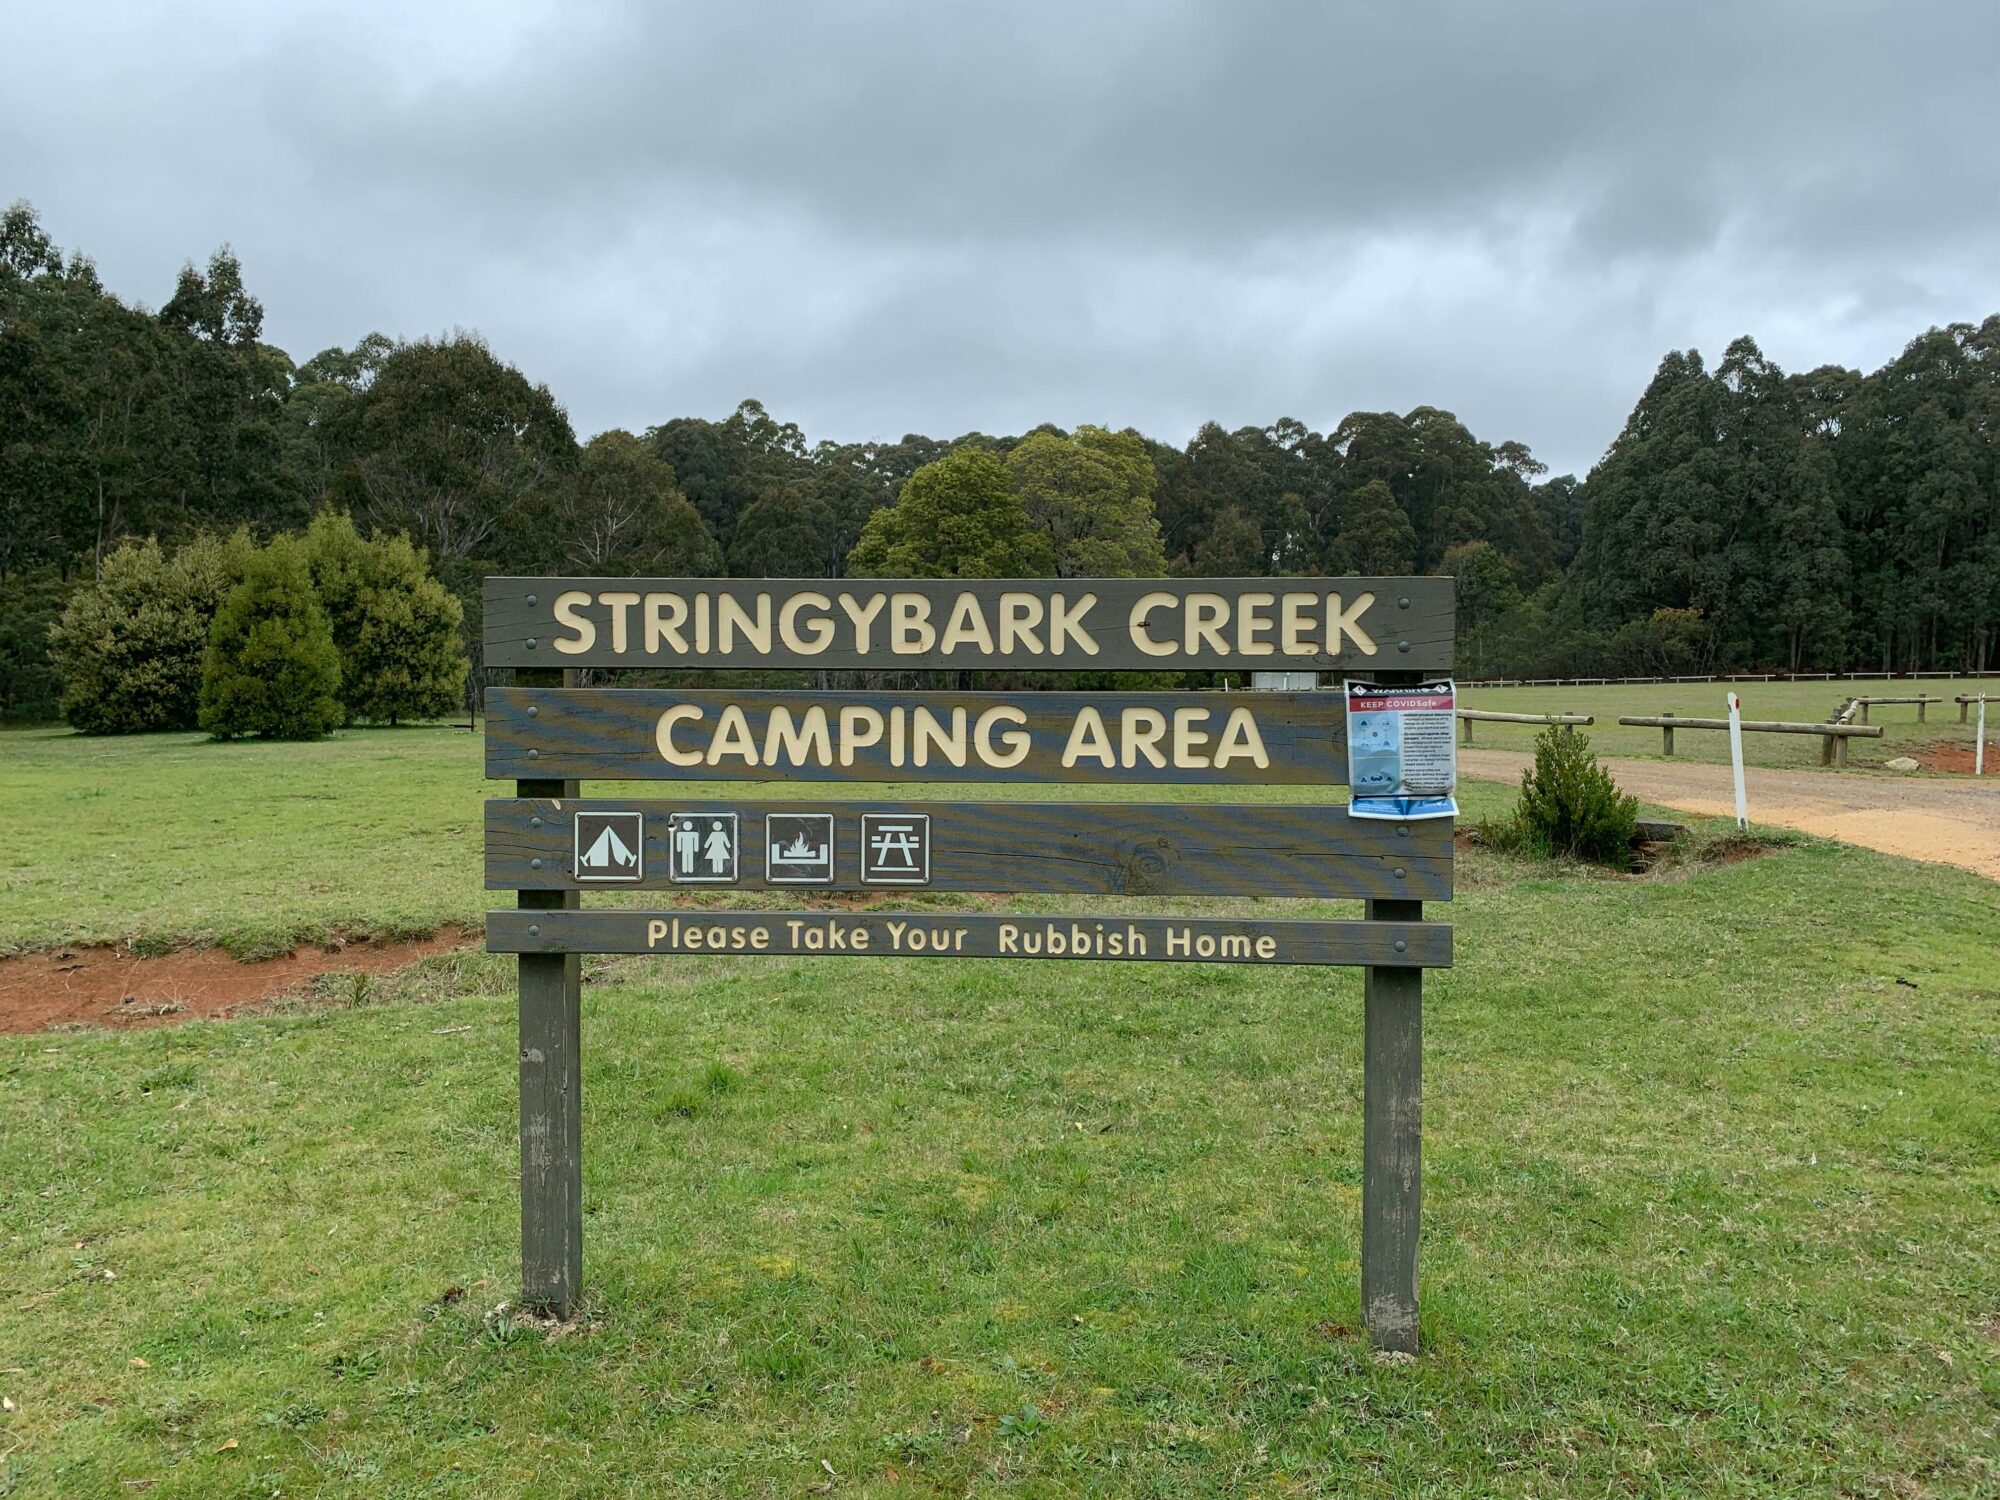 Camping is available at Stringybark Creek Camp Ground